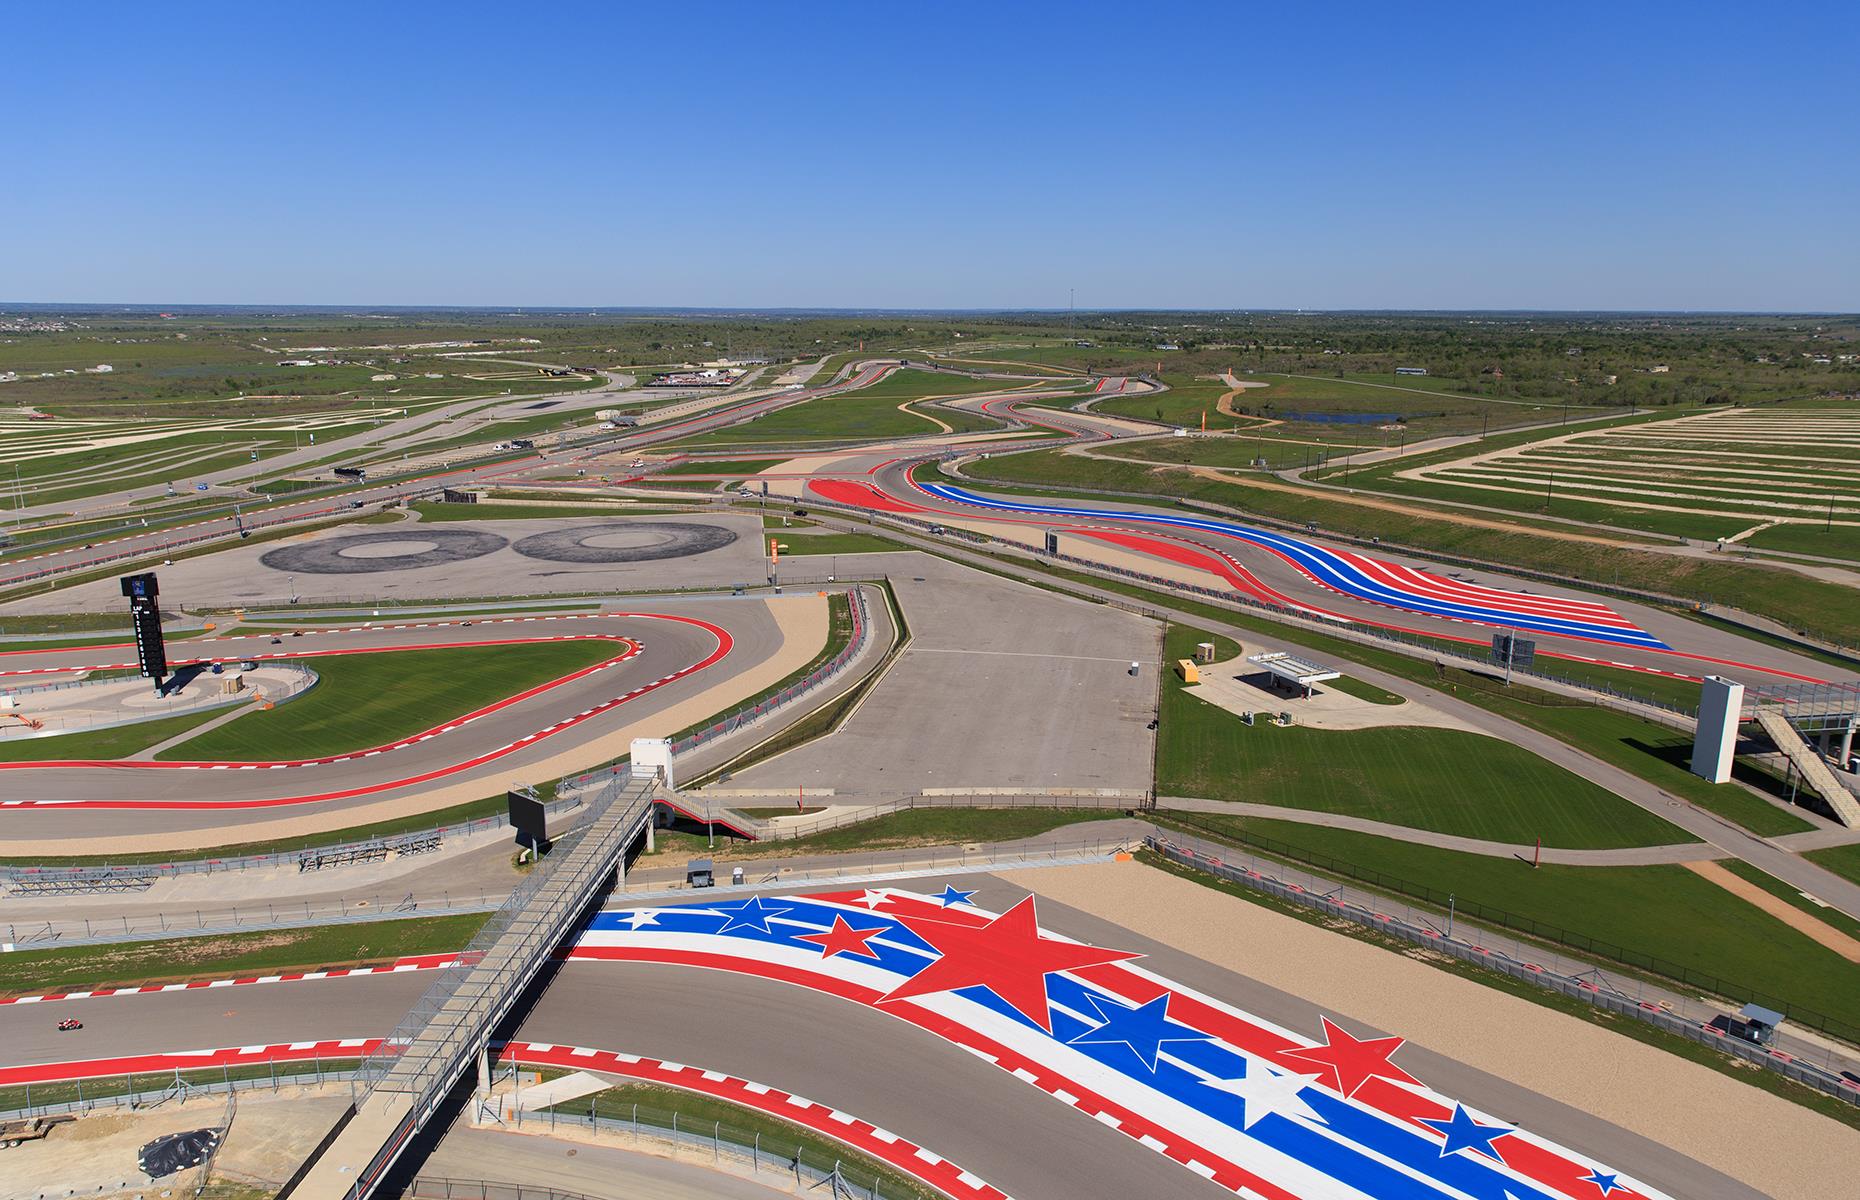 <p>Speaking of motorsports, <a href="http://circuitoftheamericas.com/">Circuit of the Americas</a> near Austin is the first purpose-built track for Formula One in the US, and it now hosts the Formula One United States Grand Prix. Described as "spectacular" by many drivers, Circuit of the Americas also offers various tours and track experiences to visitors. There's COTA Karting for fun-loving families (in some karts drivers can be as young as 14) and a chance to whiz around the track in an Audi R8 V10 plus.</p>  <p><strong><a href="http://bit.ly/3roL4wv">Love this? Follow our Facebook page for more travel inspiration</a></strong></p>